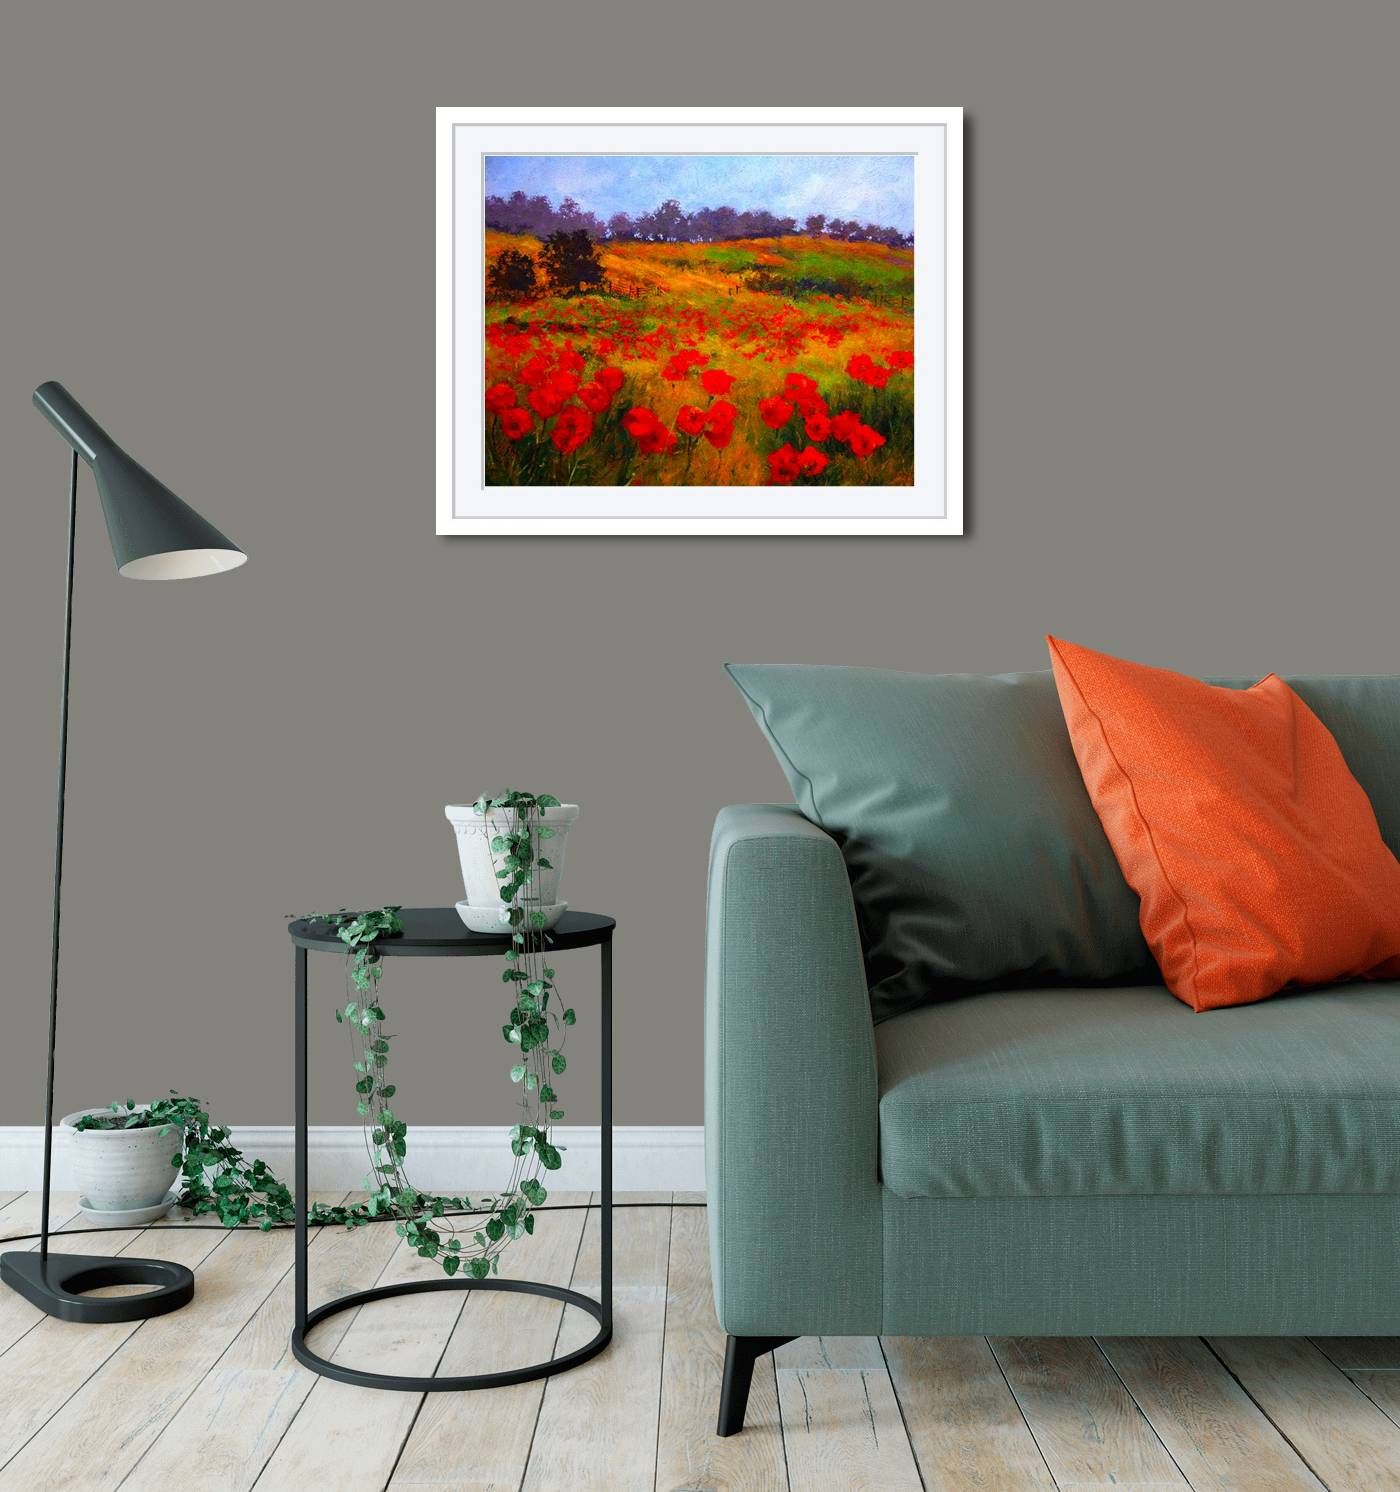 Large - Meadow poppies - 921 by Chris McMorrow